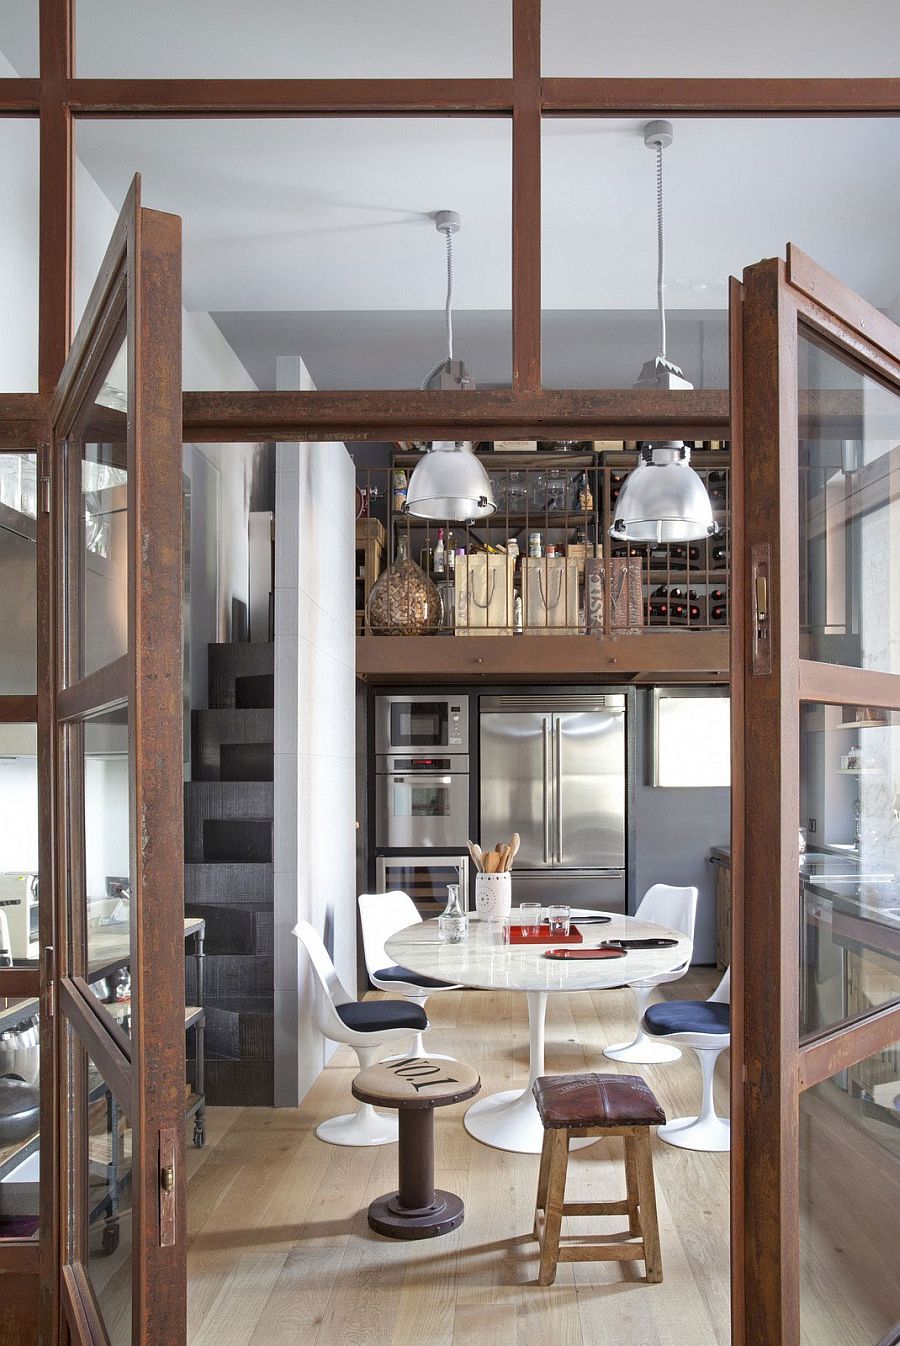 Vintage details shape the Italian kitchen and dining area